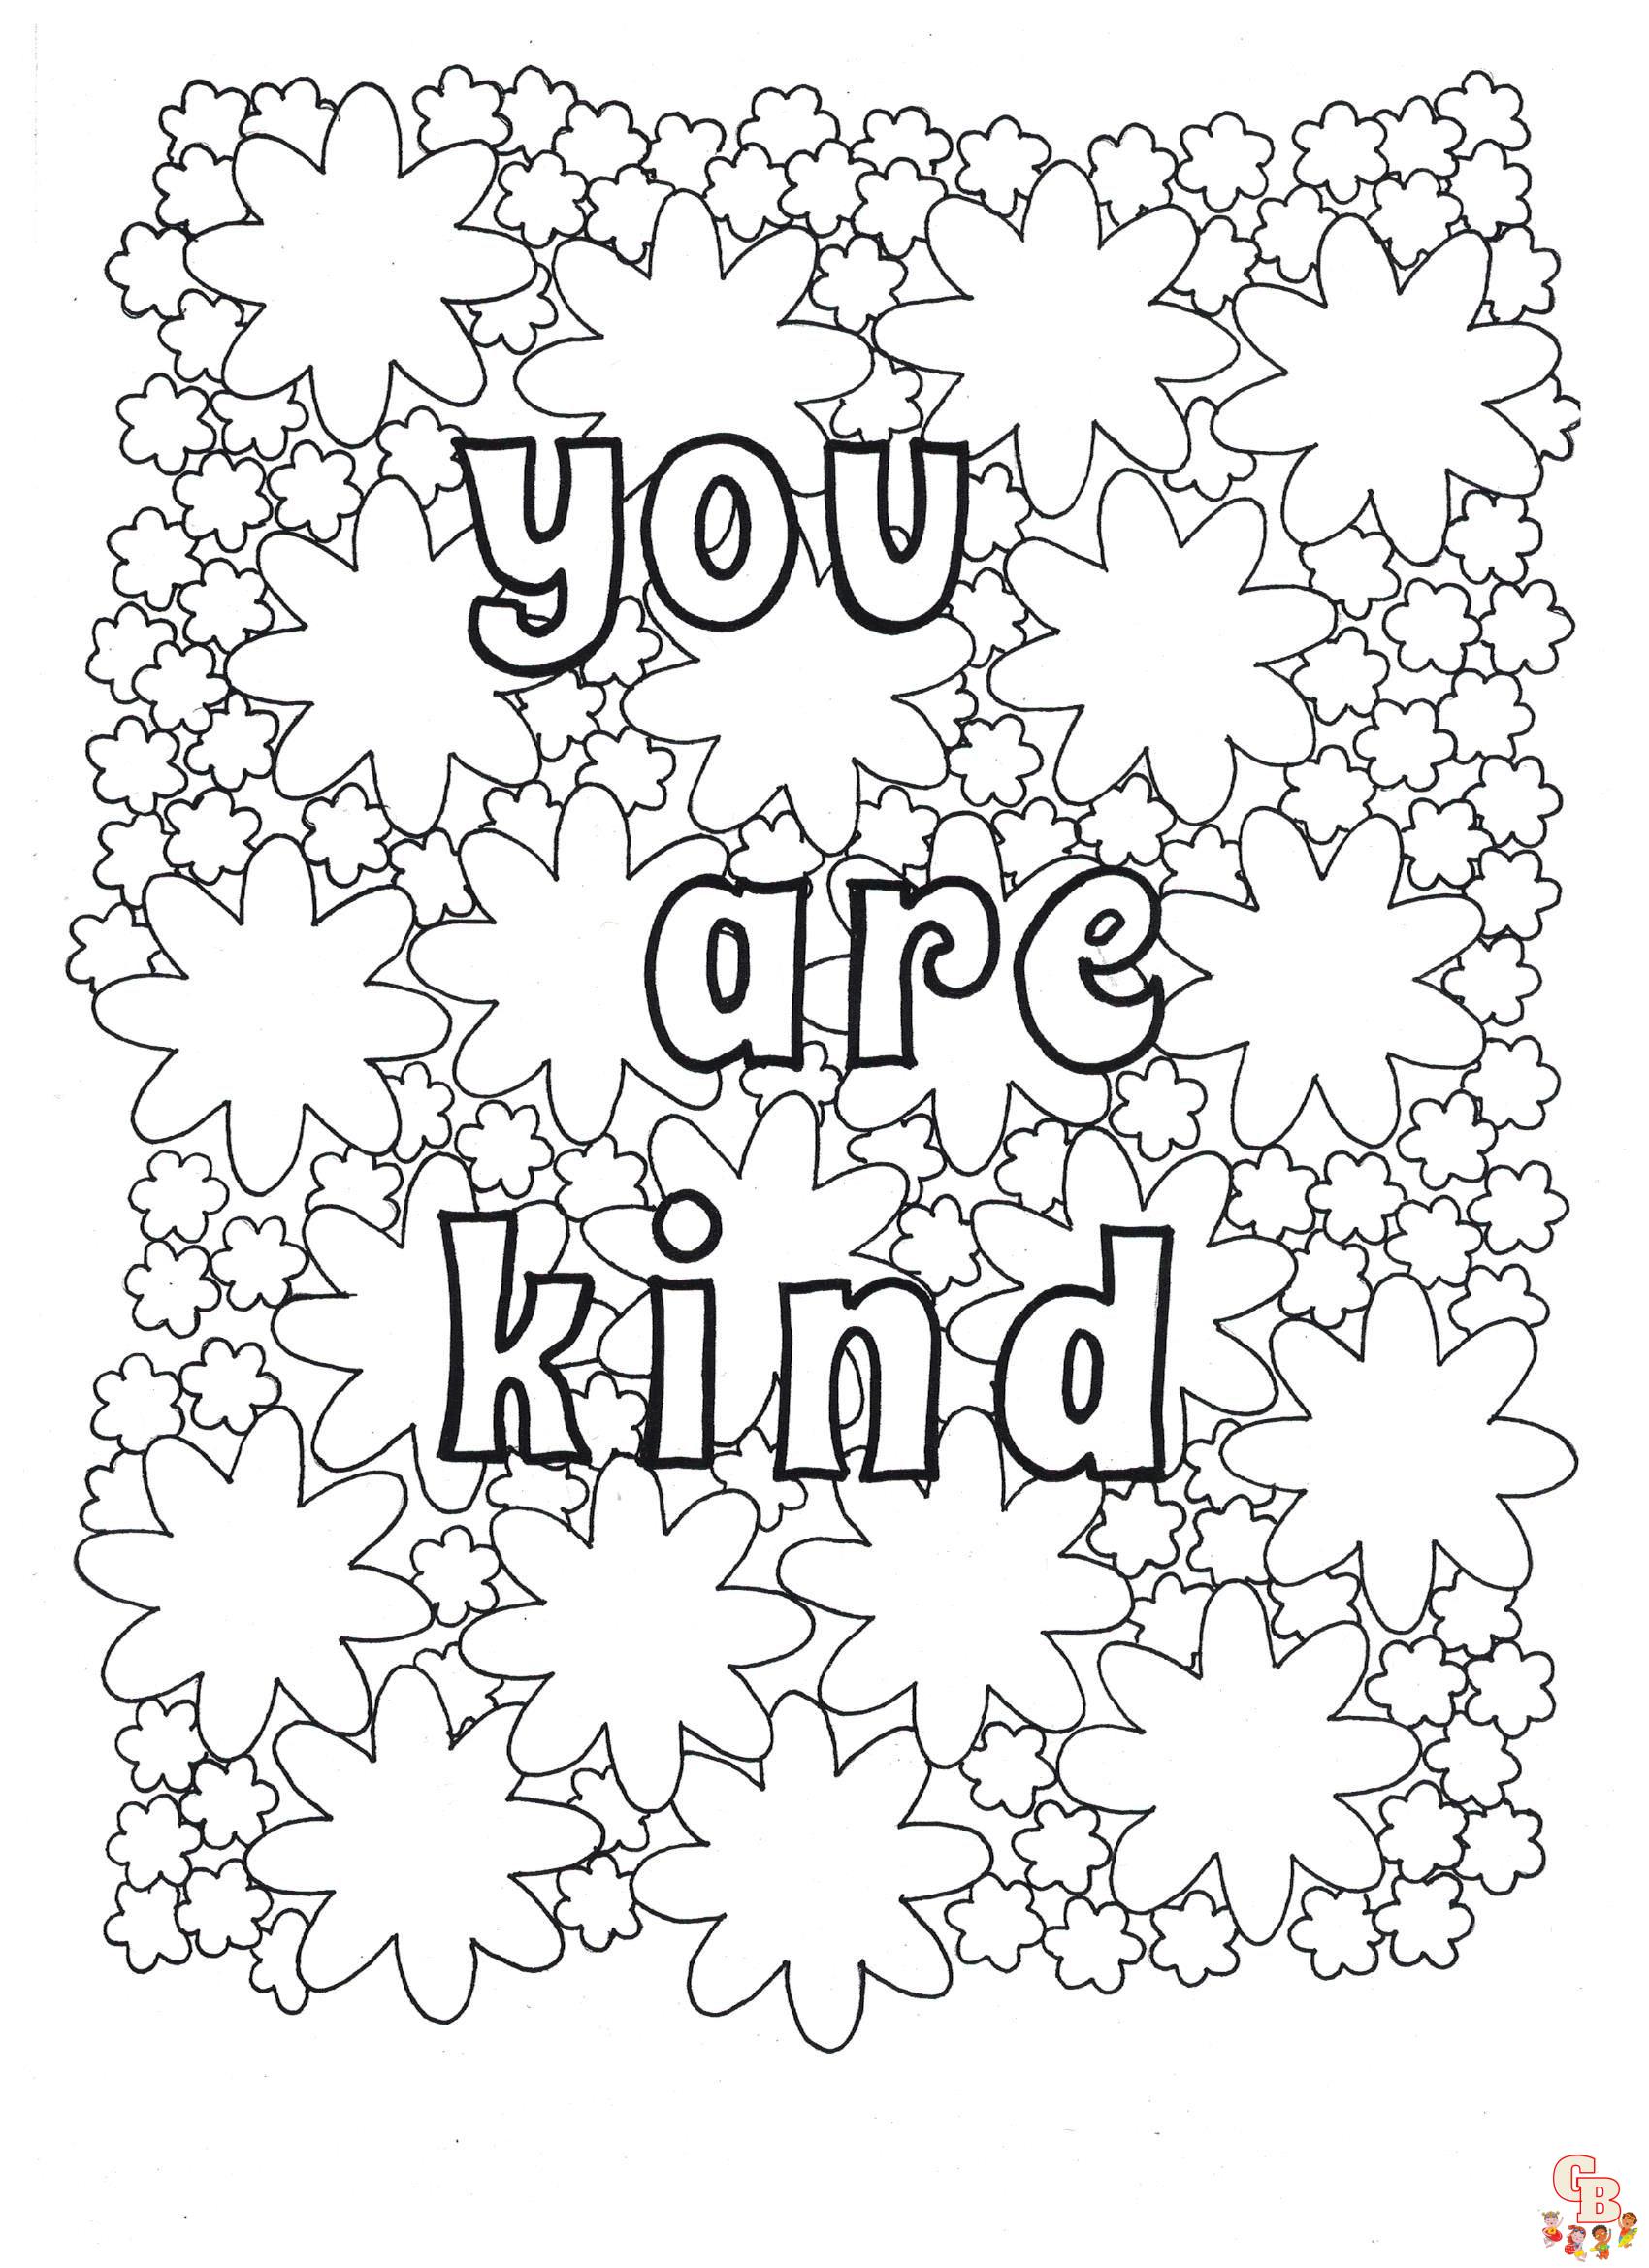 Coloring pages to teach kindness to kids